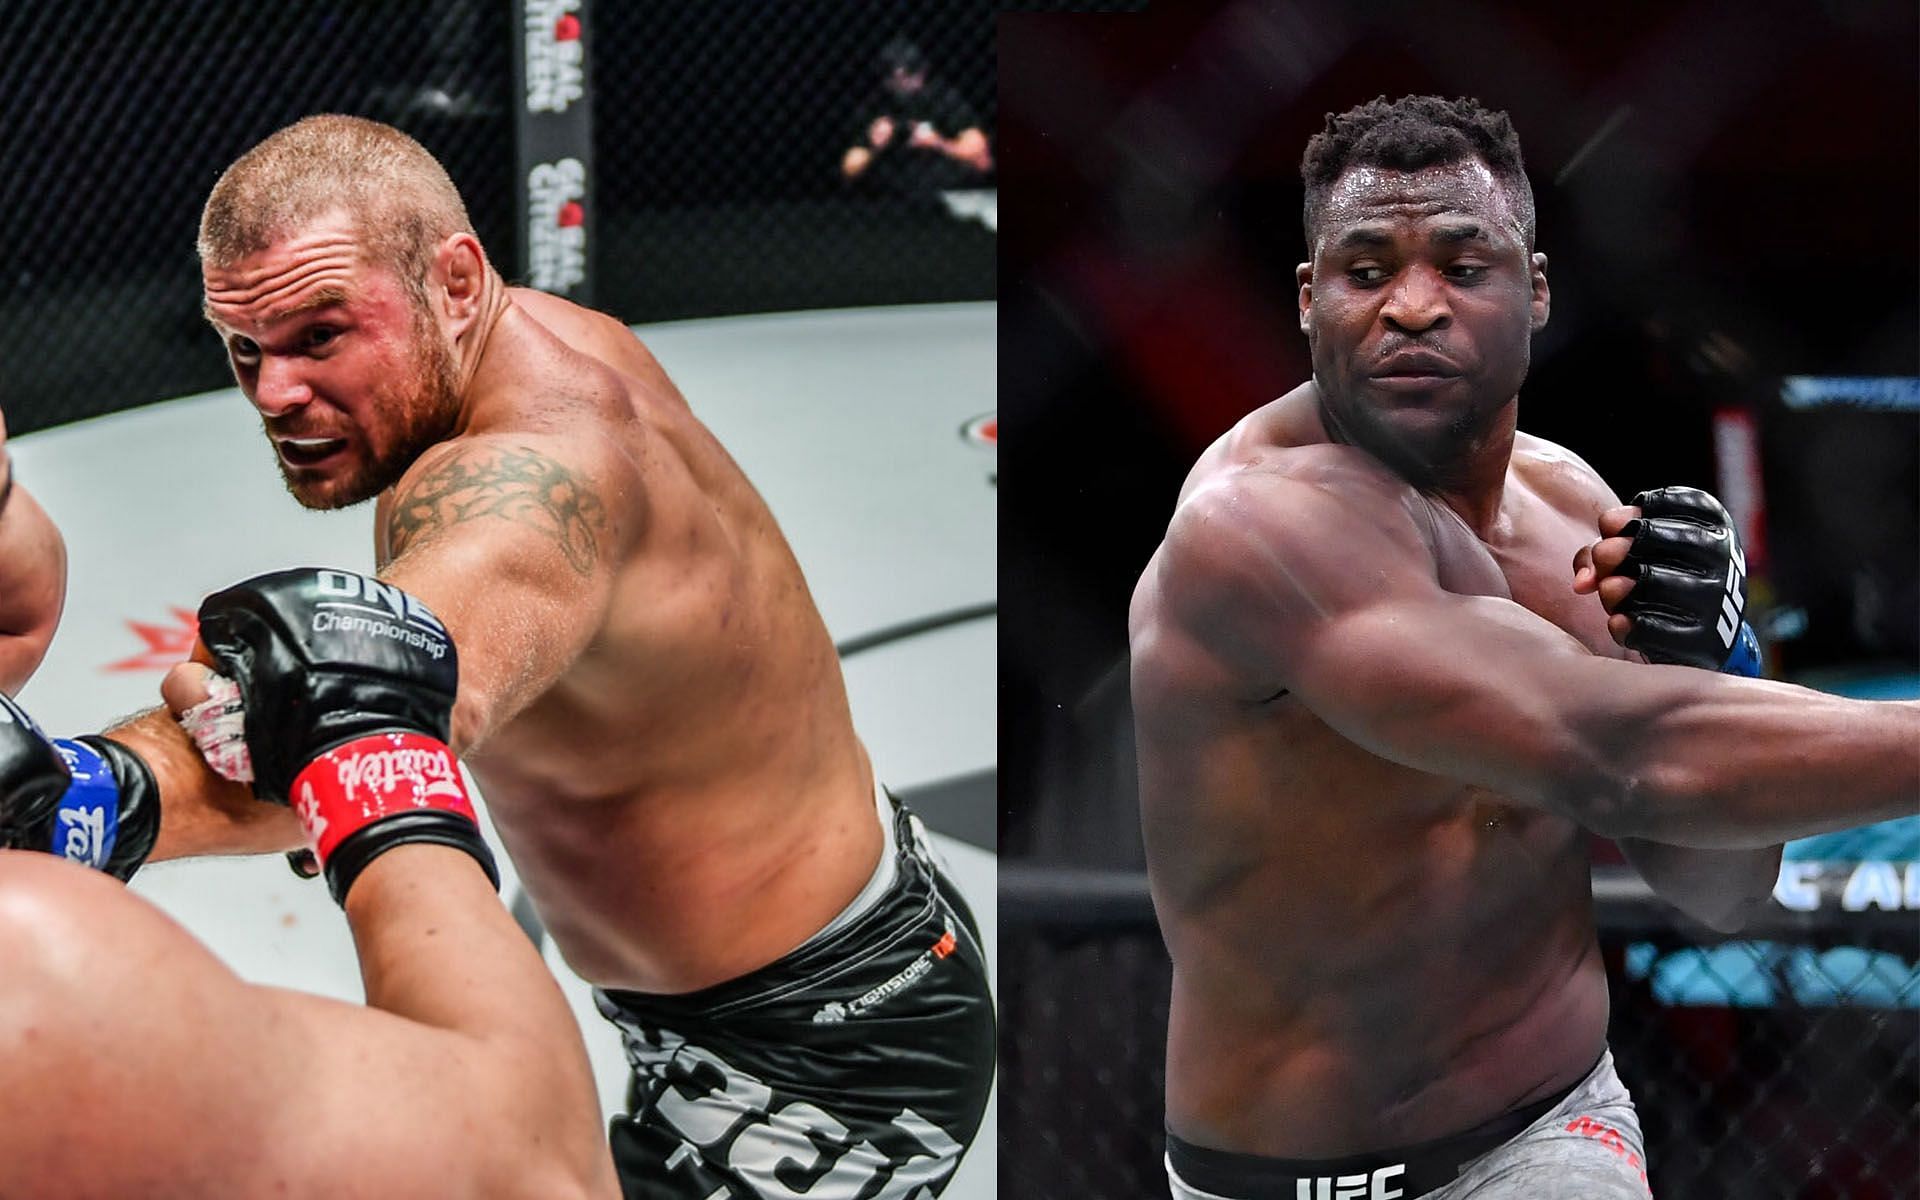 Anatoly Malykhin (Left) thinks Francis Ngannou (Right) is quite &quot;slow&quot; on his pad work. | [Photos: ONE Championship/GQ]